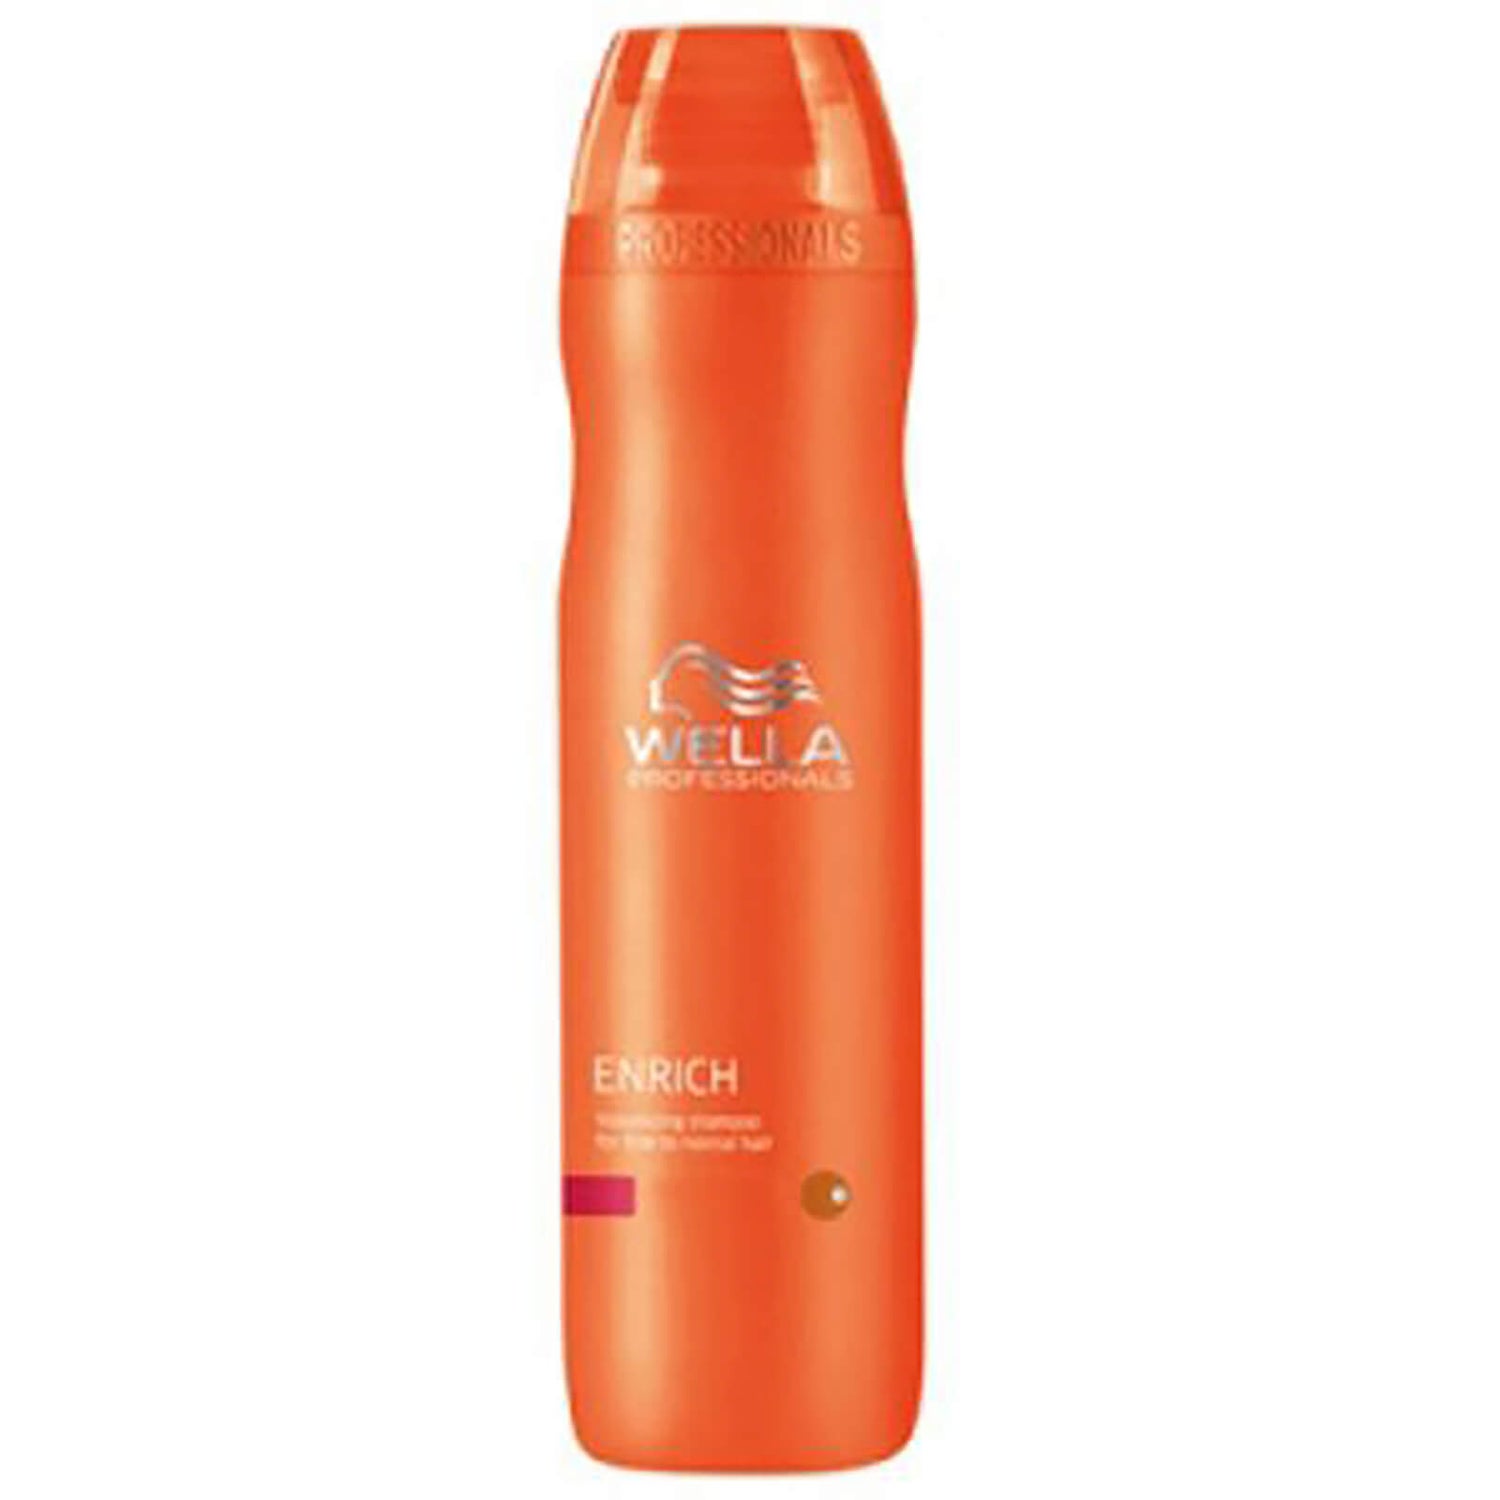 Wella Professionals Enrich Volumising Shampoo For Fine To Normal Hair (250 ml)